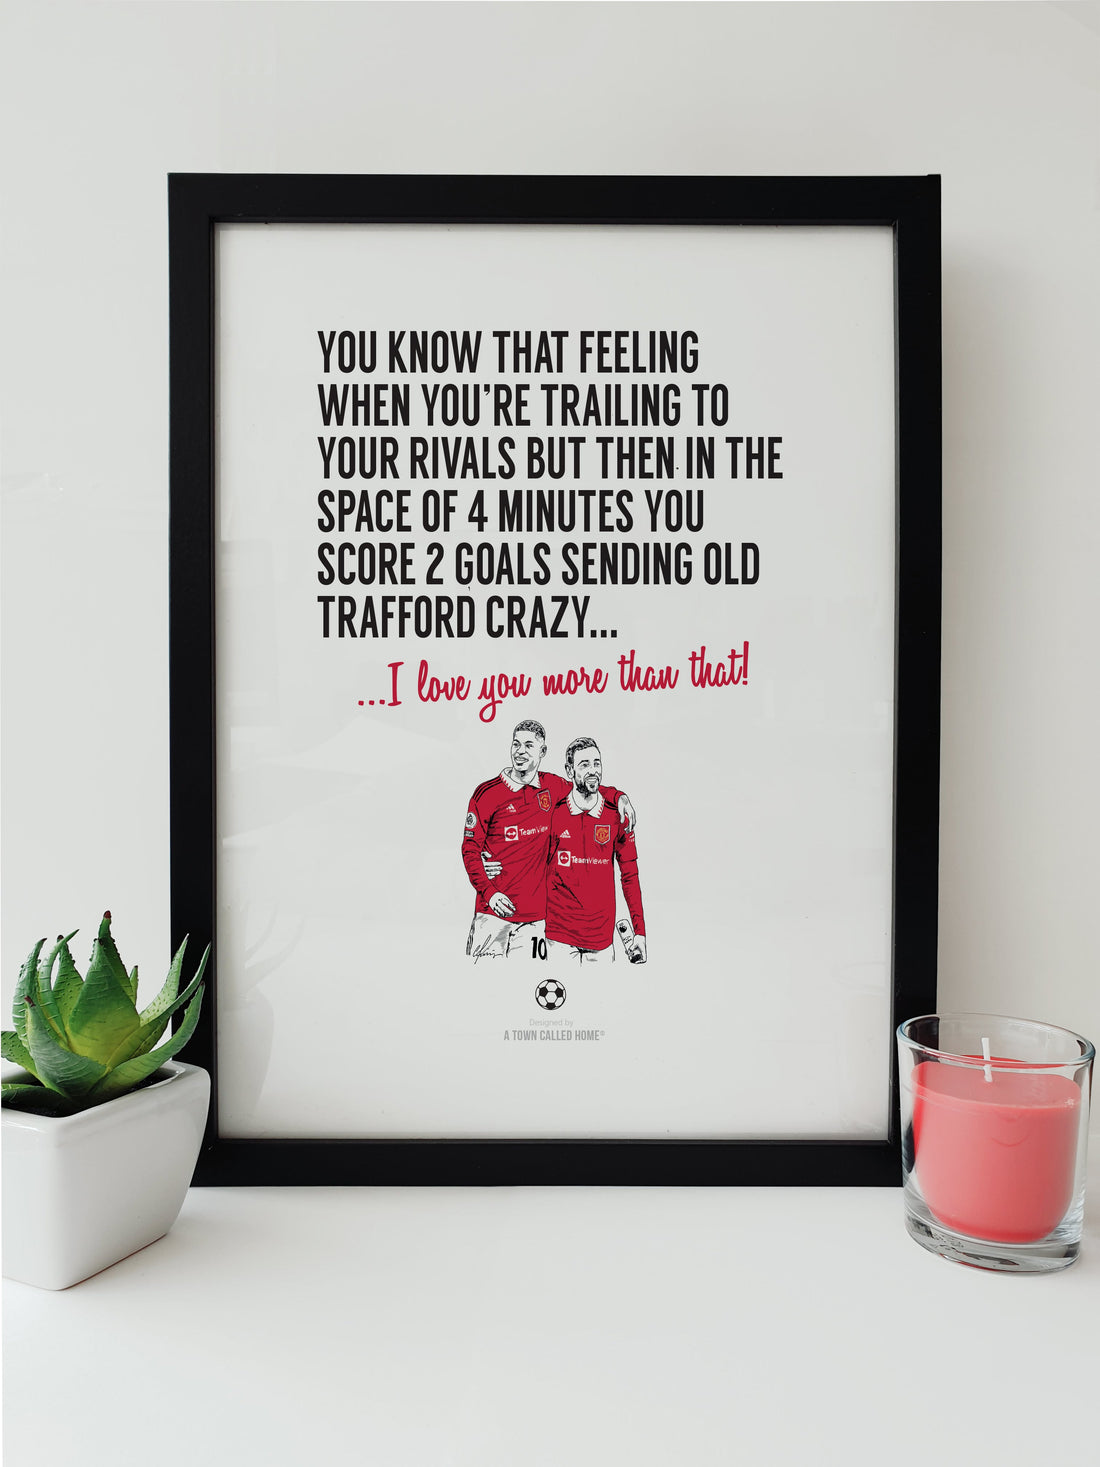 A unique Print / poster art, perfect for any Man United / Red Devils supporter  to celebrate the derby win against City on Saturday 14 January 2022.